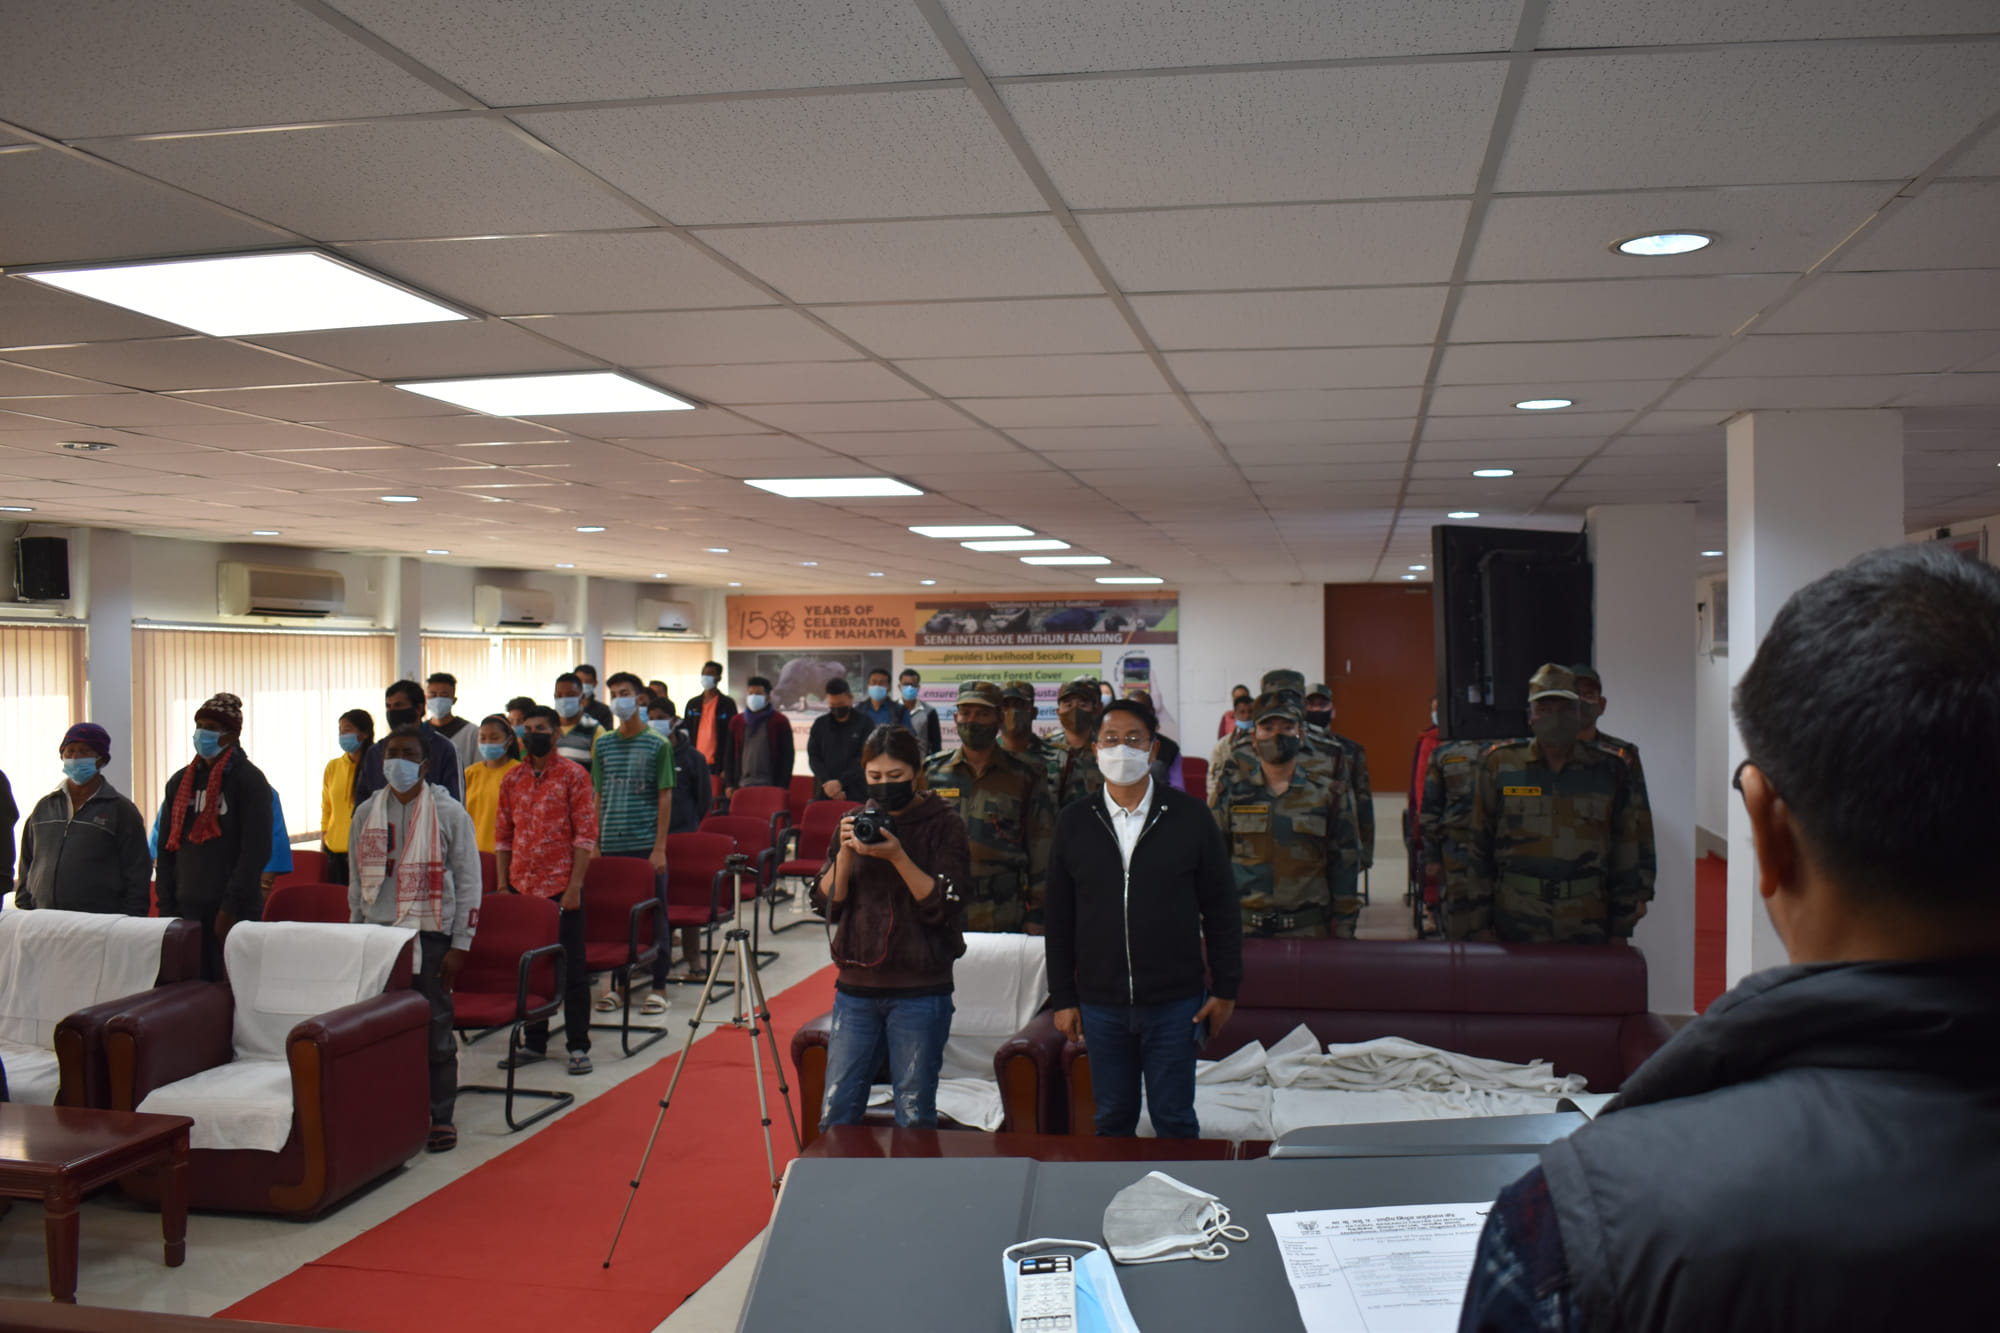 ICAR-NRC on Mithun successfully conducted closing ceremony for Swachhta Pakhwada  on 31st December 2021